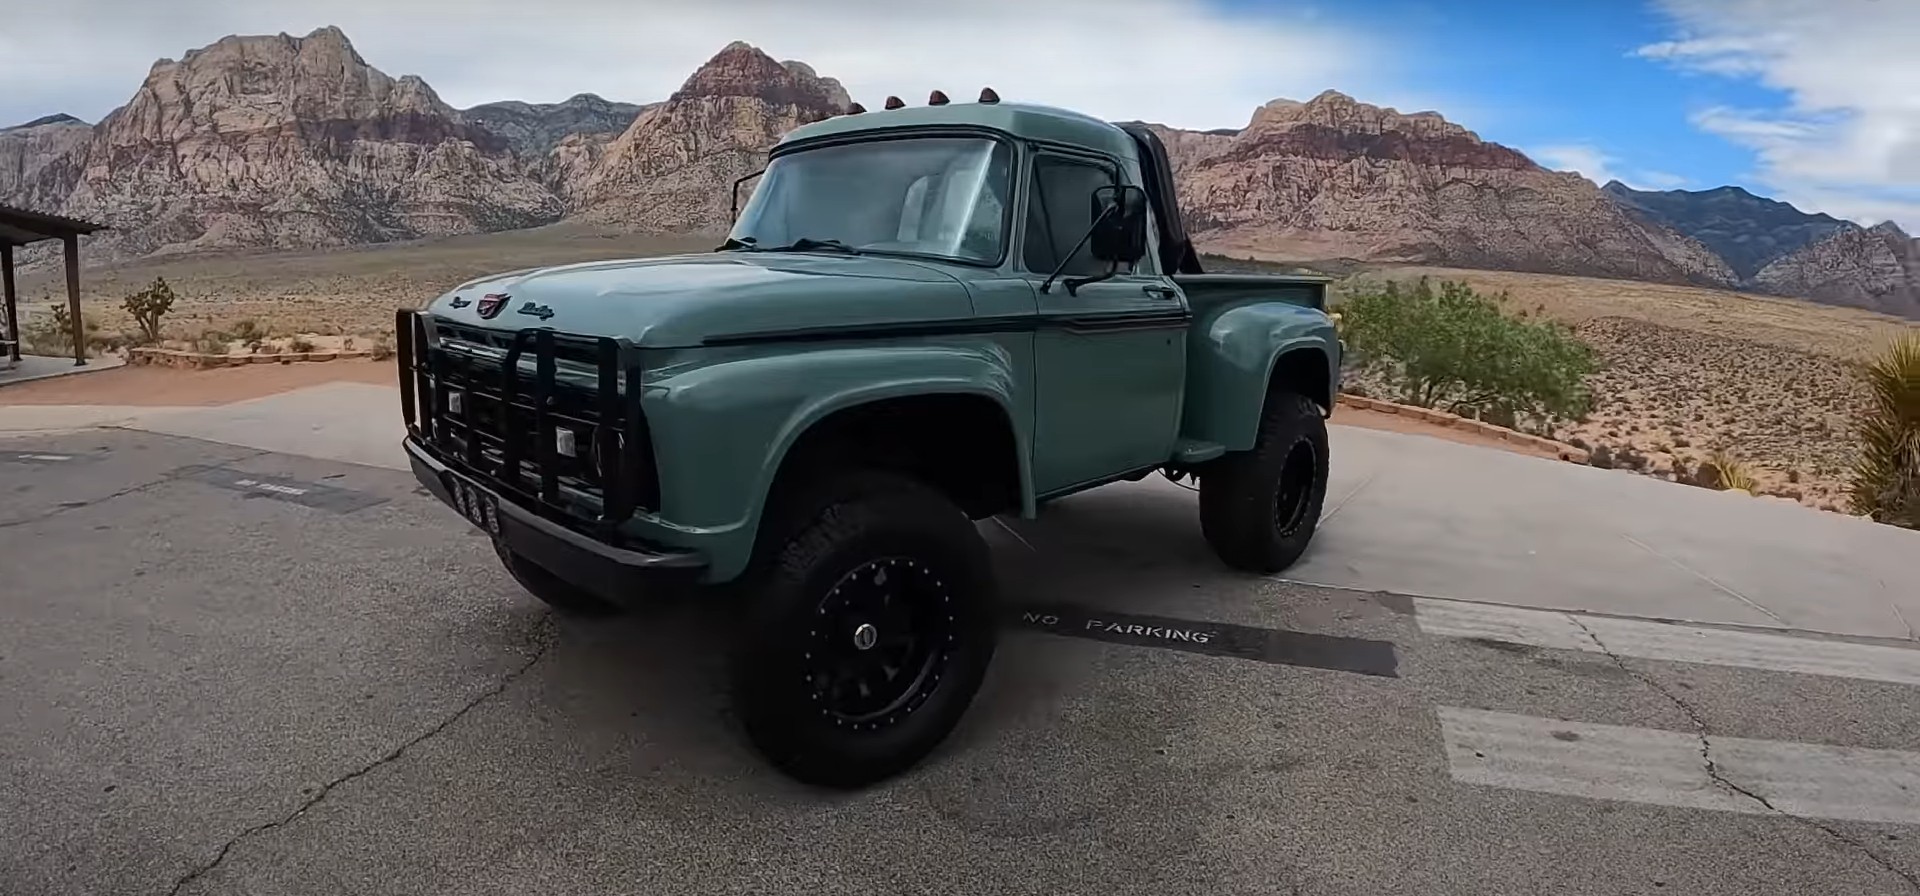 Ford 250 pickup